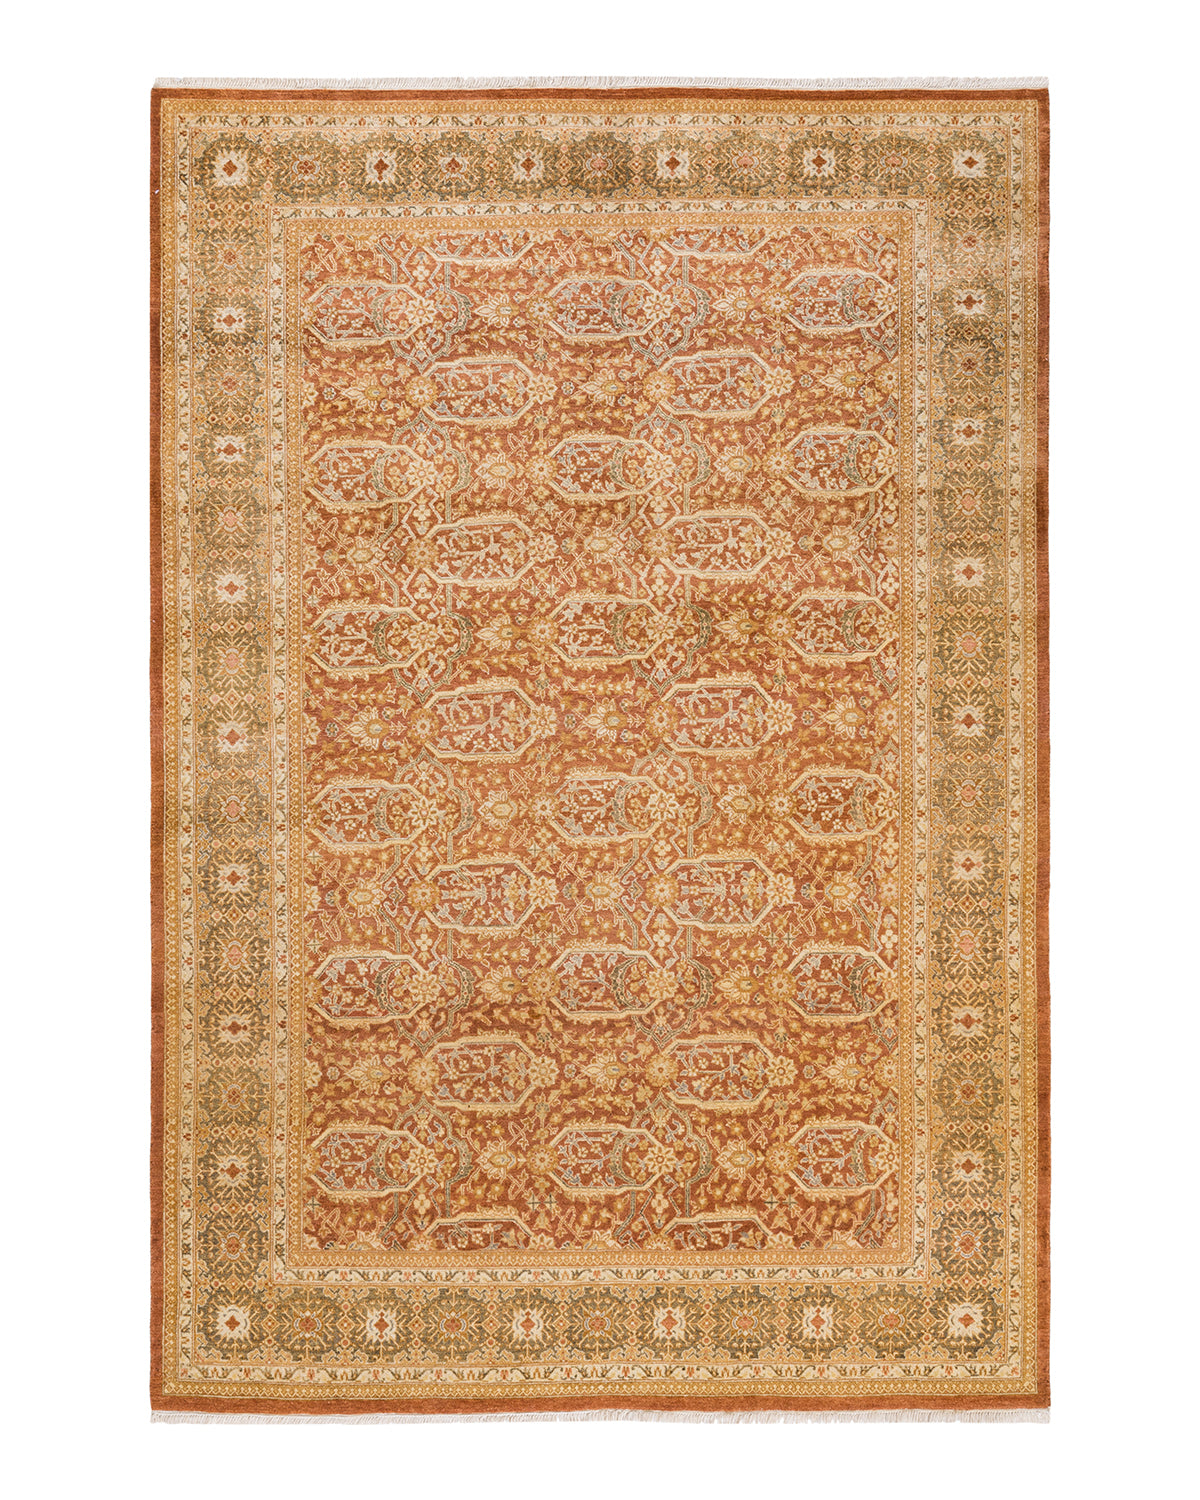 Mogul, One-of-a-Kind Hand-Knotted Area Rug  - Brown, 6' 2" x 8' 10"